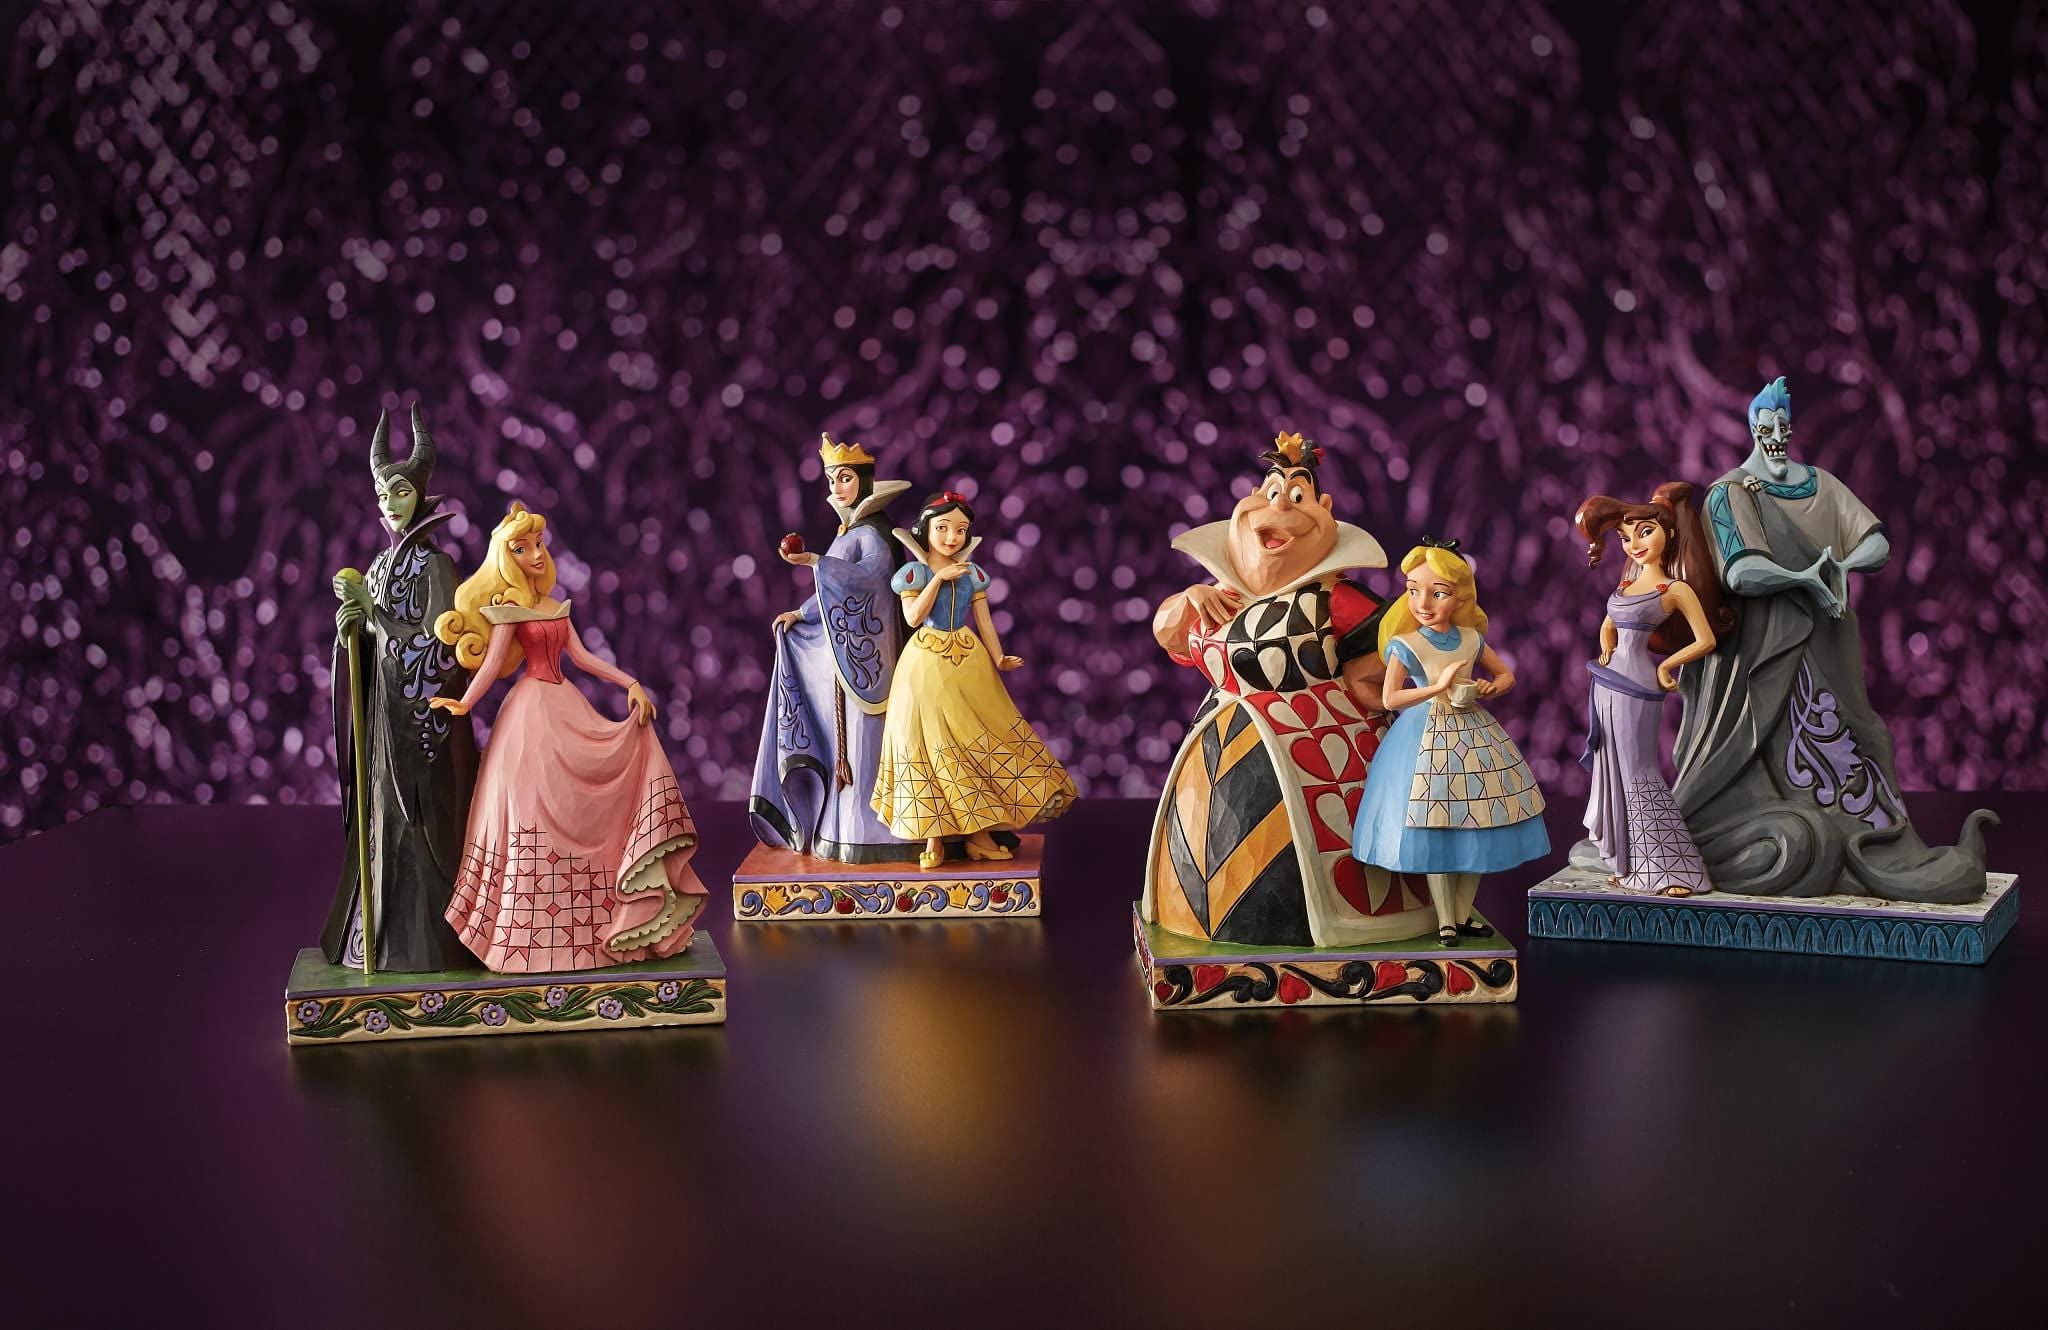 Enesco Disney Ornament Disney Traditions Figurine - Evil and Innocence - Snow White and Evil Queen